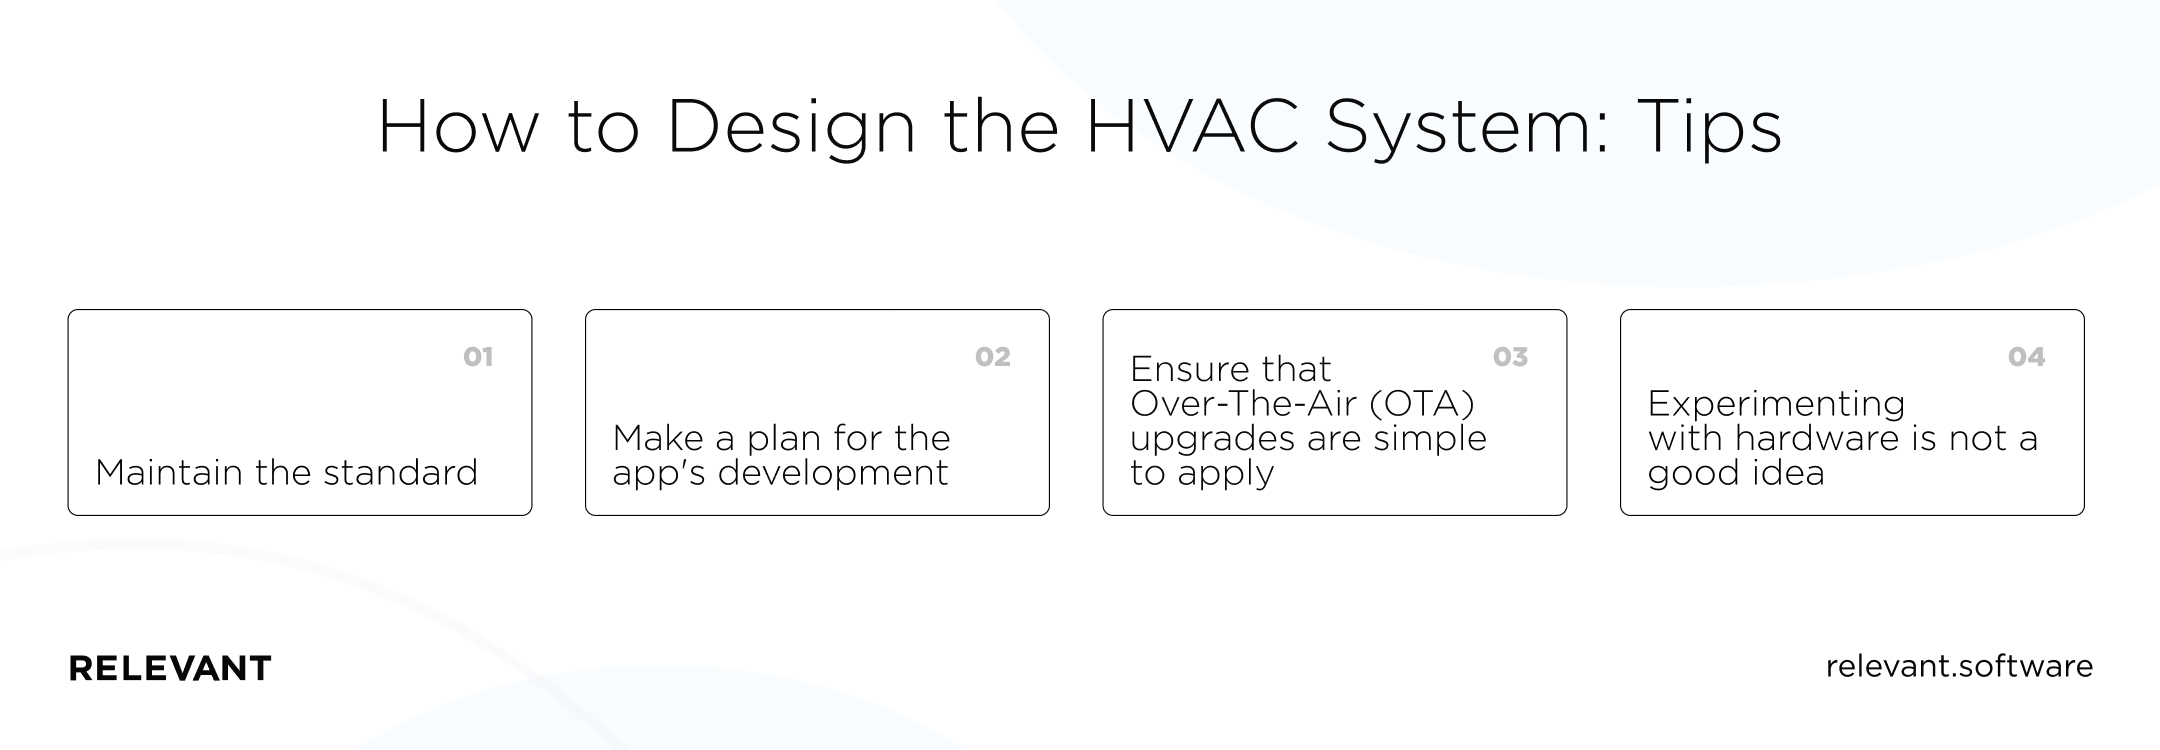 How to Design the HVAC System: Tips